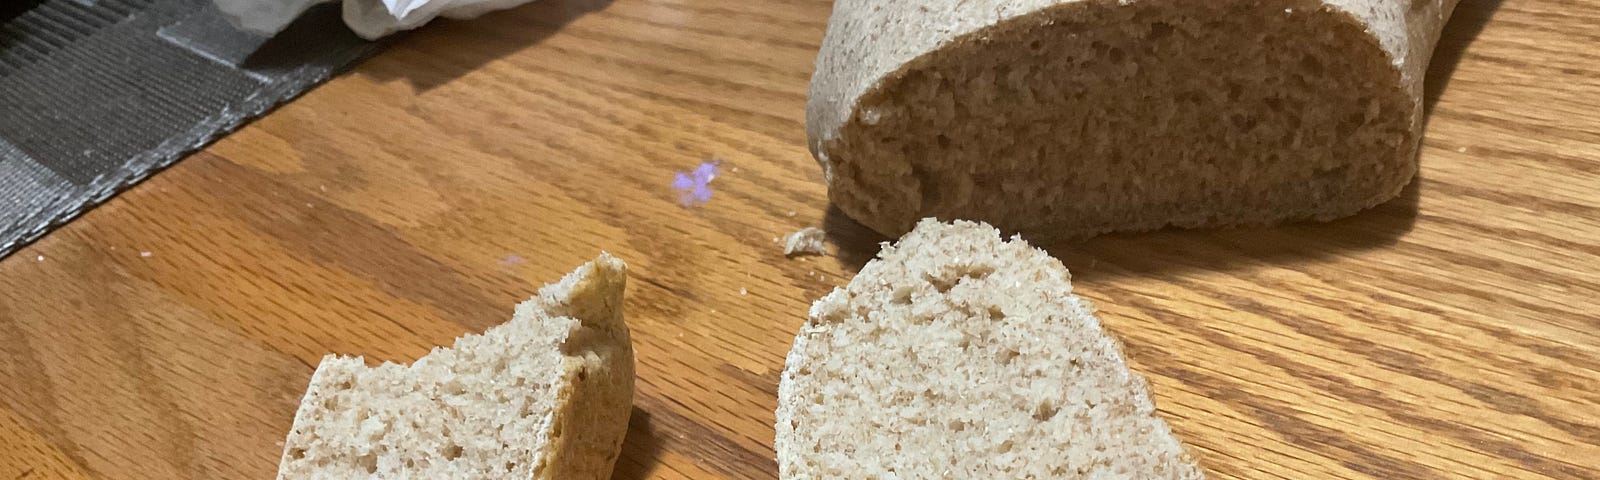 Photo of freshly baked bread taken by the author. Credit Jane Harris